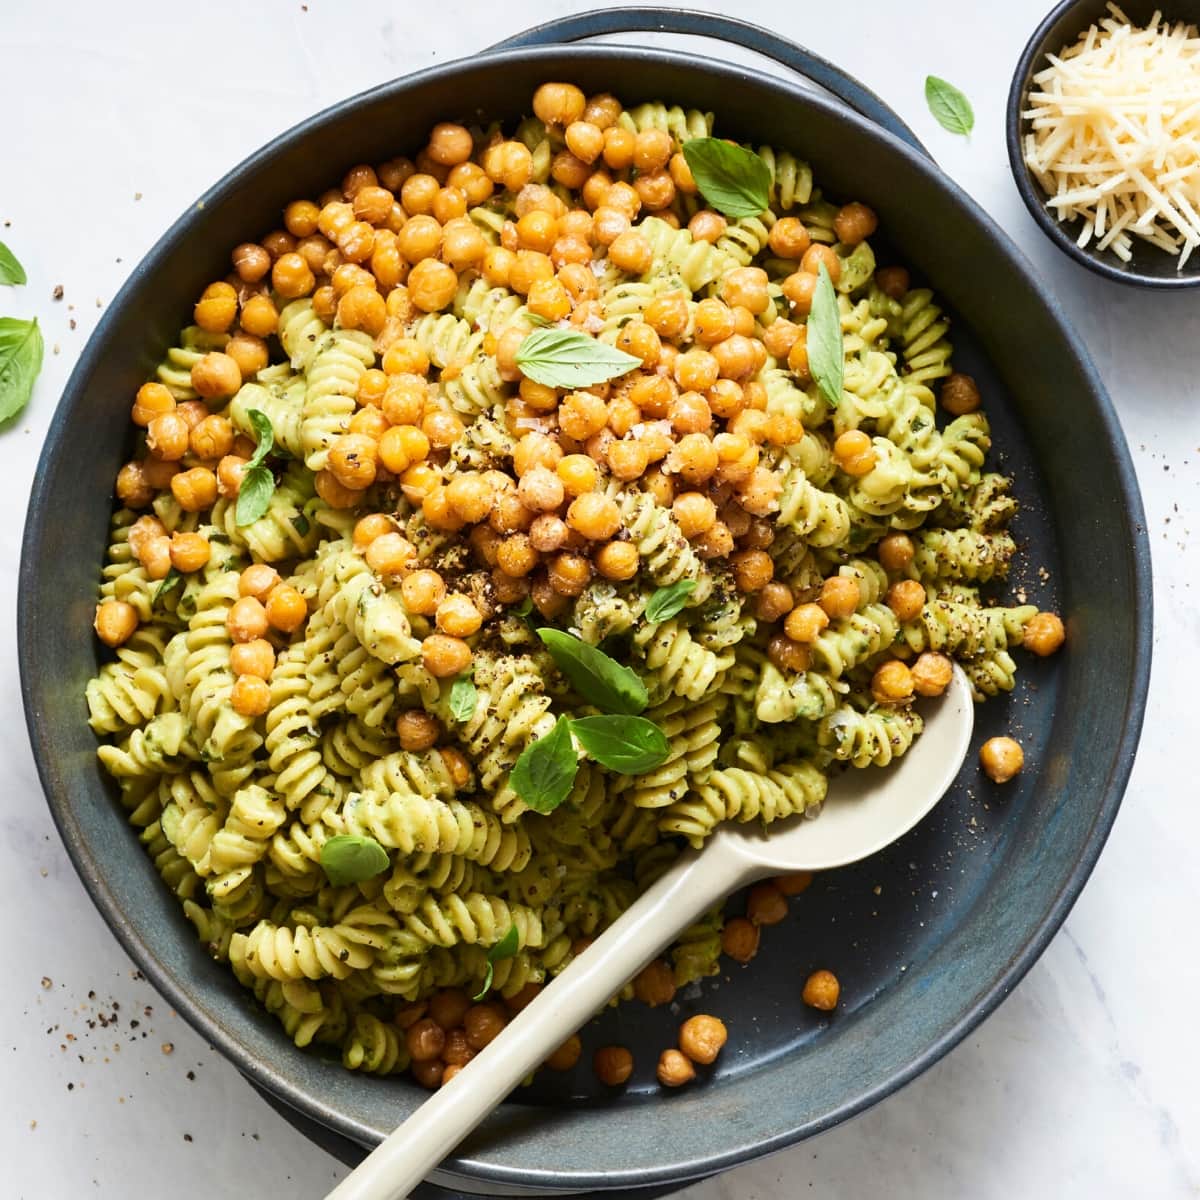 A large black cast iron skillet filled with pasta noodles coated in a green sauce and topped with chickpeas and fresh basil leaves.